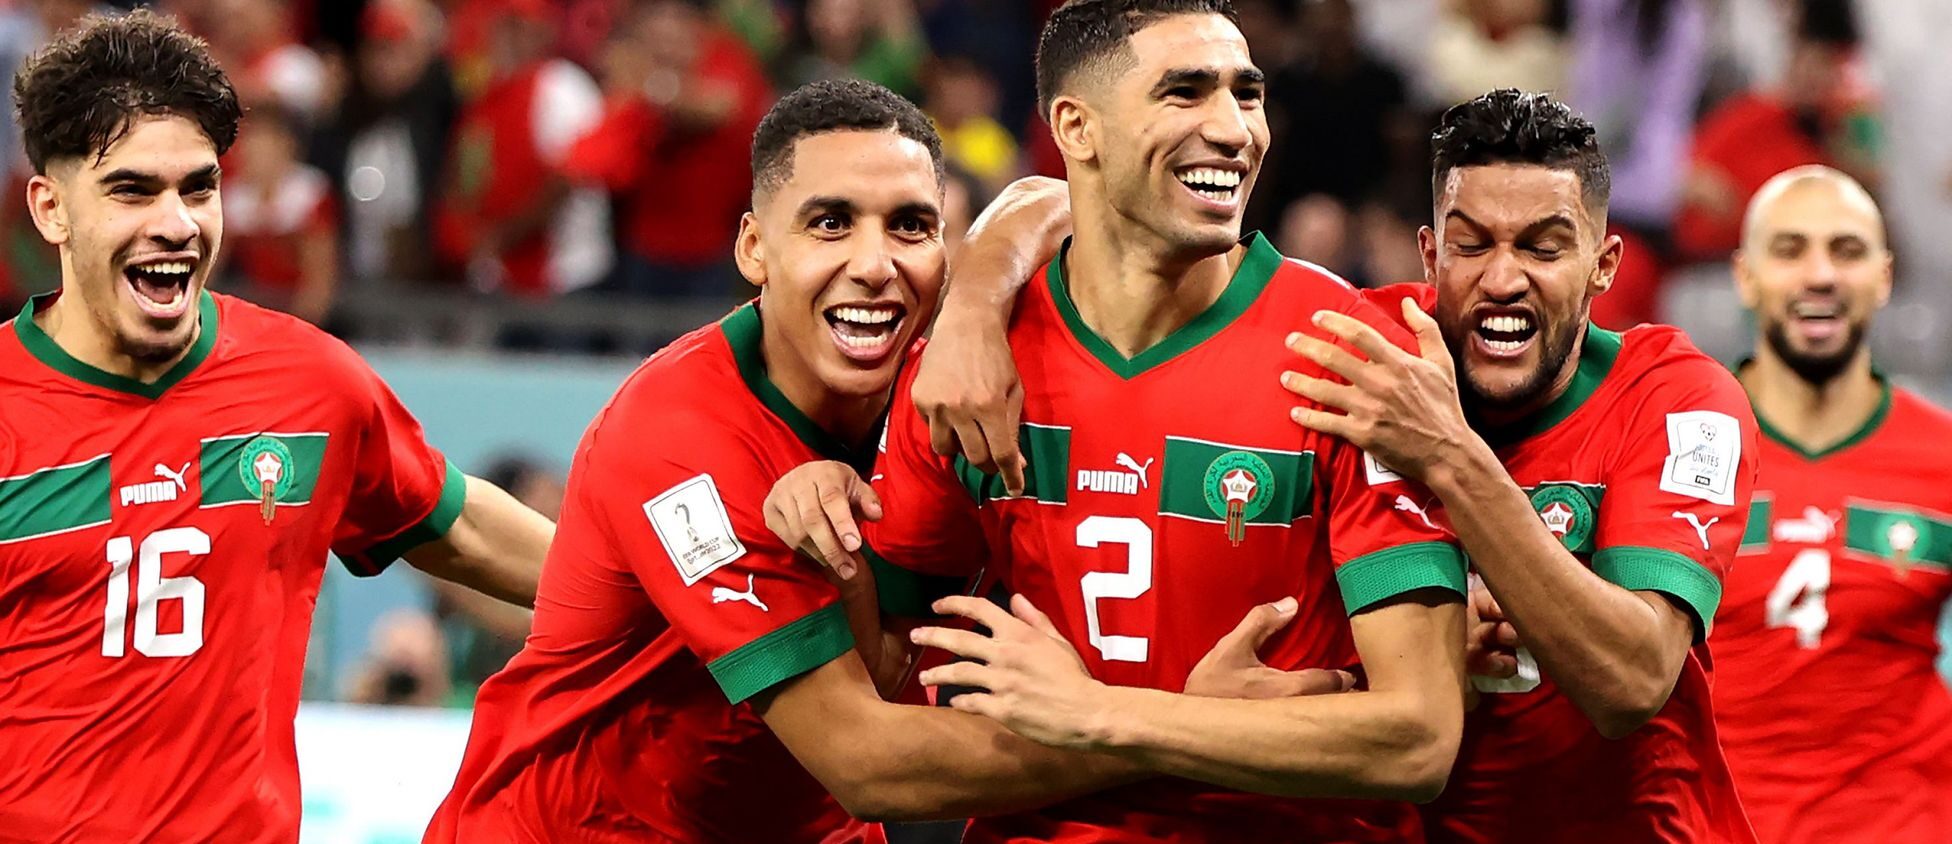 Below is our Morocco vs Portugal preview, predictions and potential lineups for their 2022 World Cup quarter-final clash in Qatar